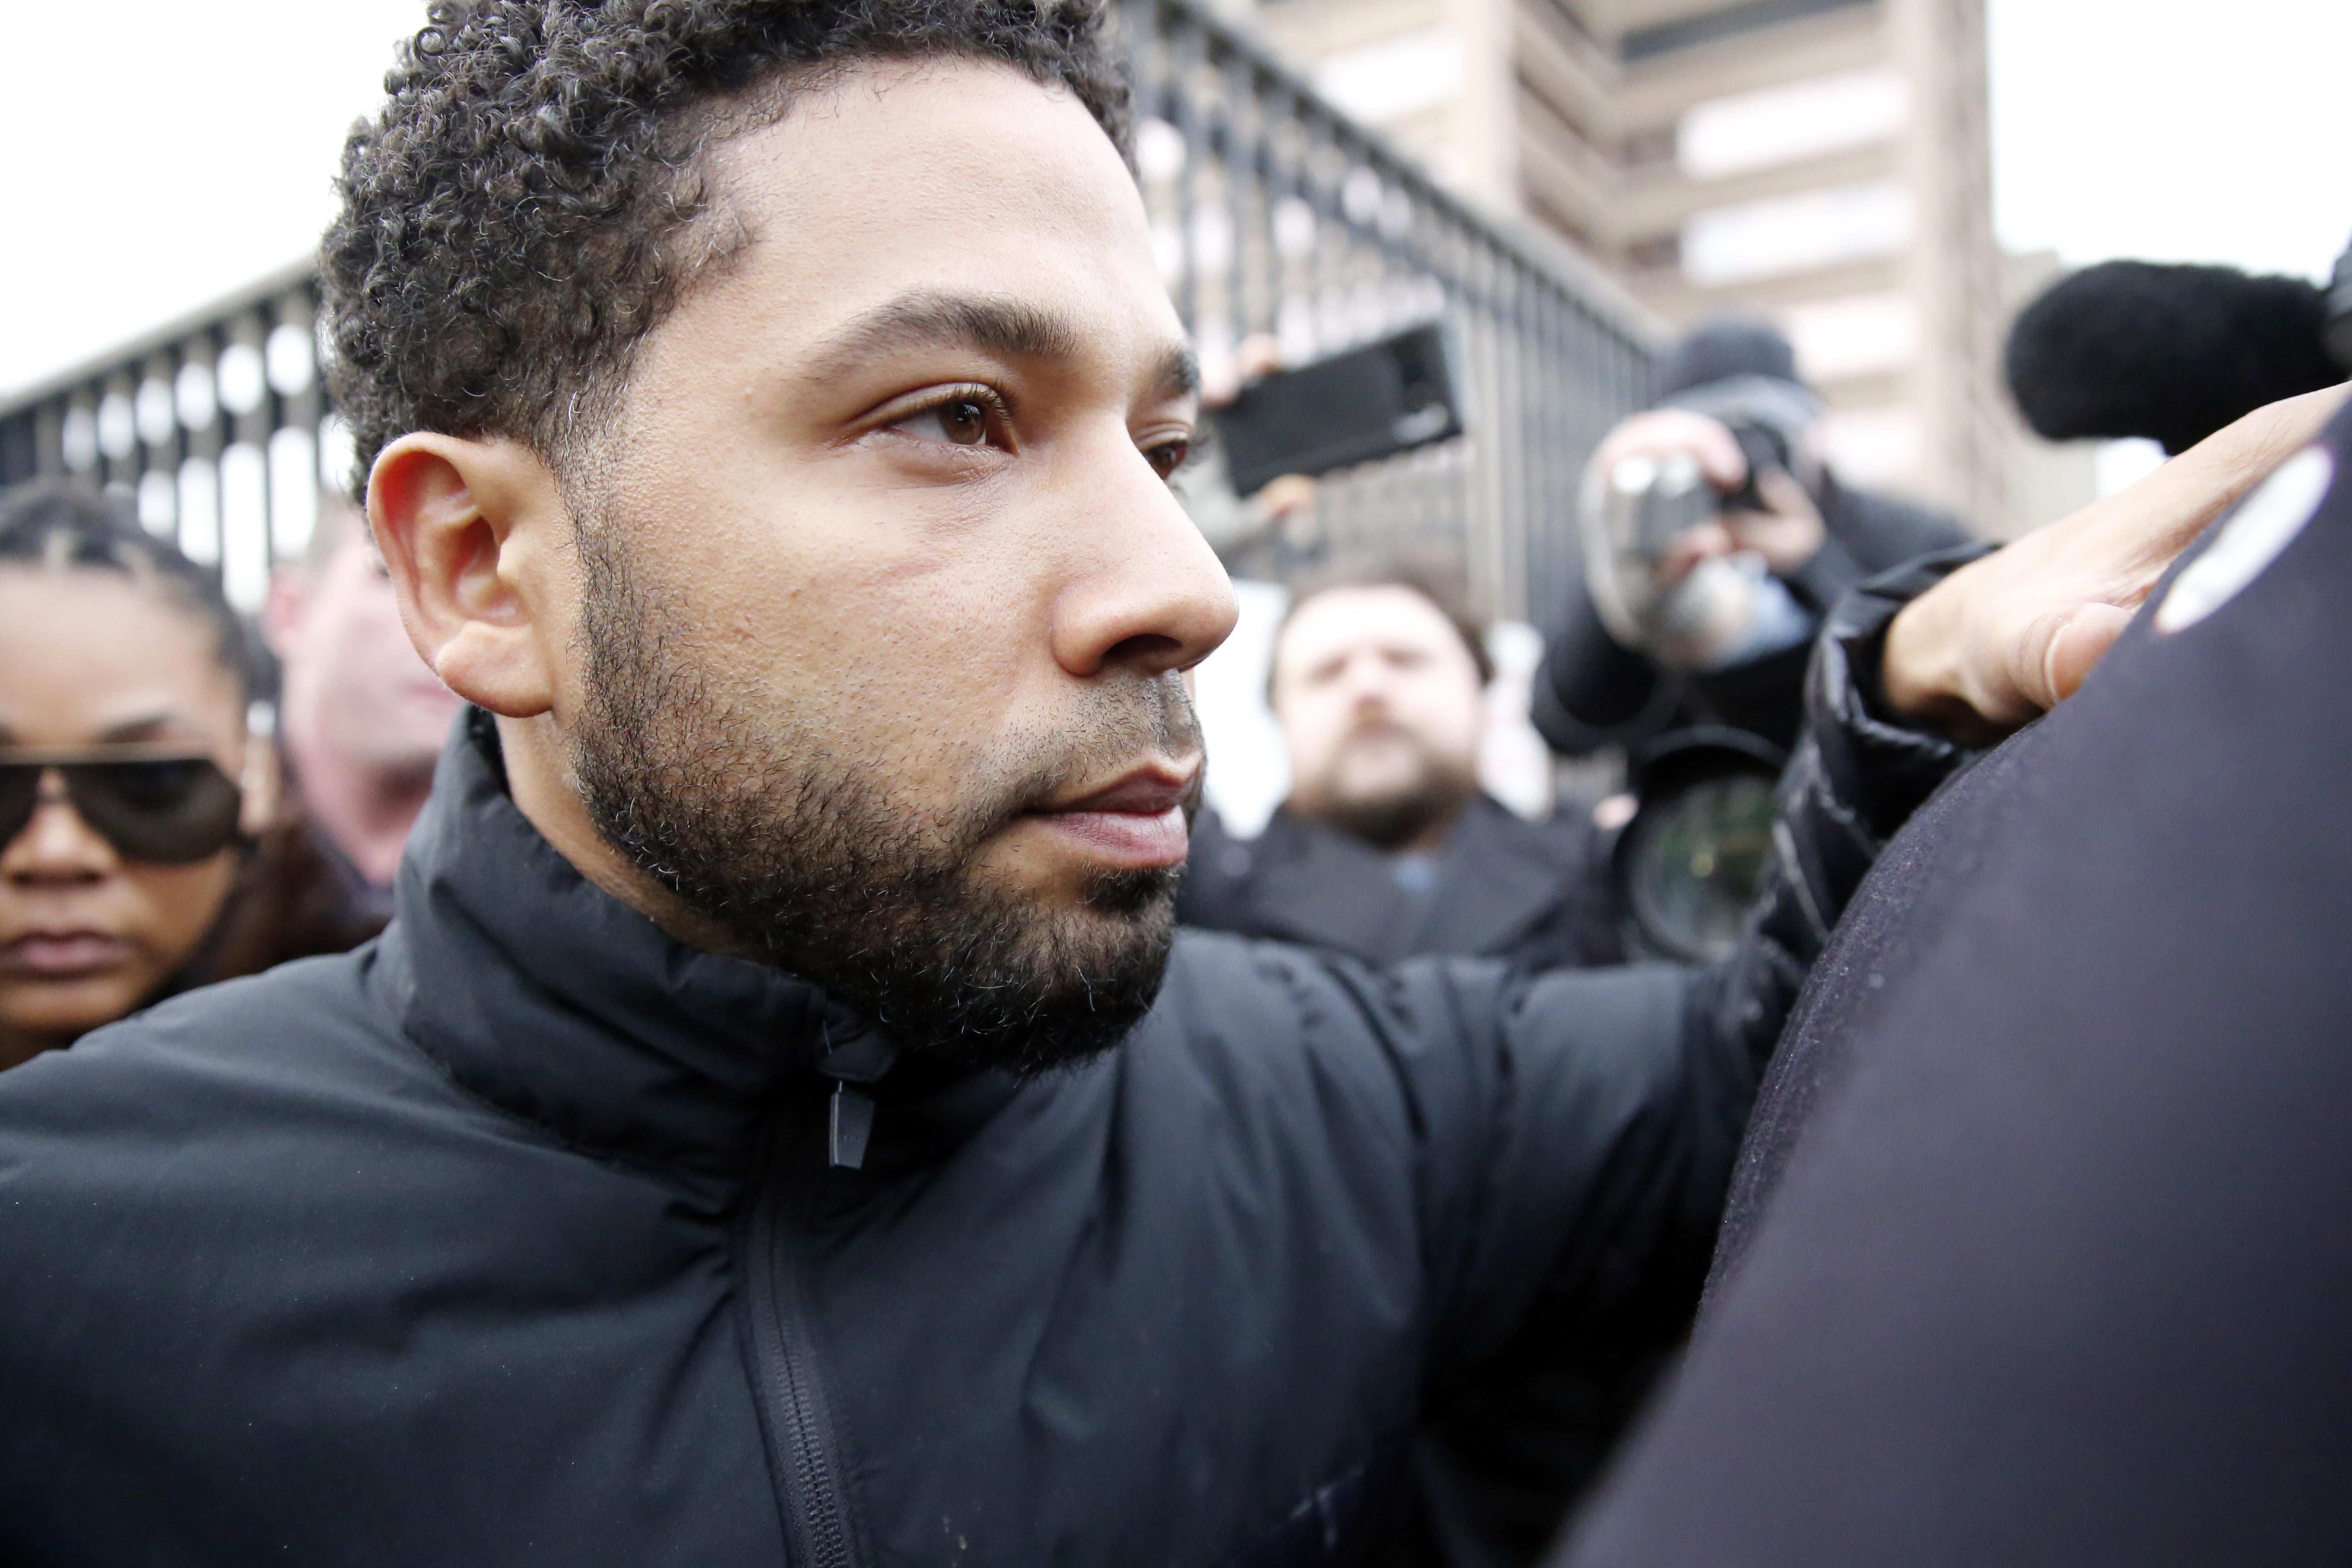 Jussie Smollett can be seen surrounded by a throng of people, some of whom have cameras.